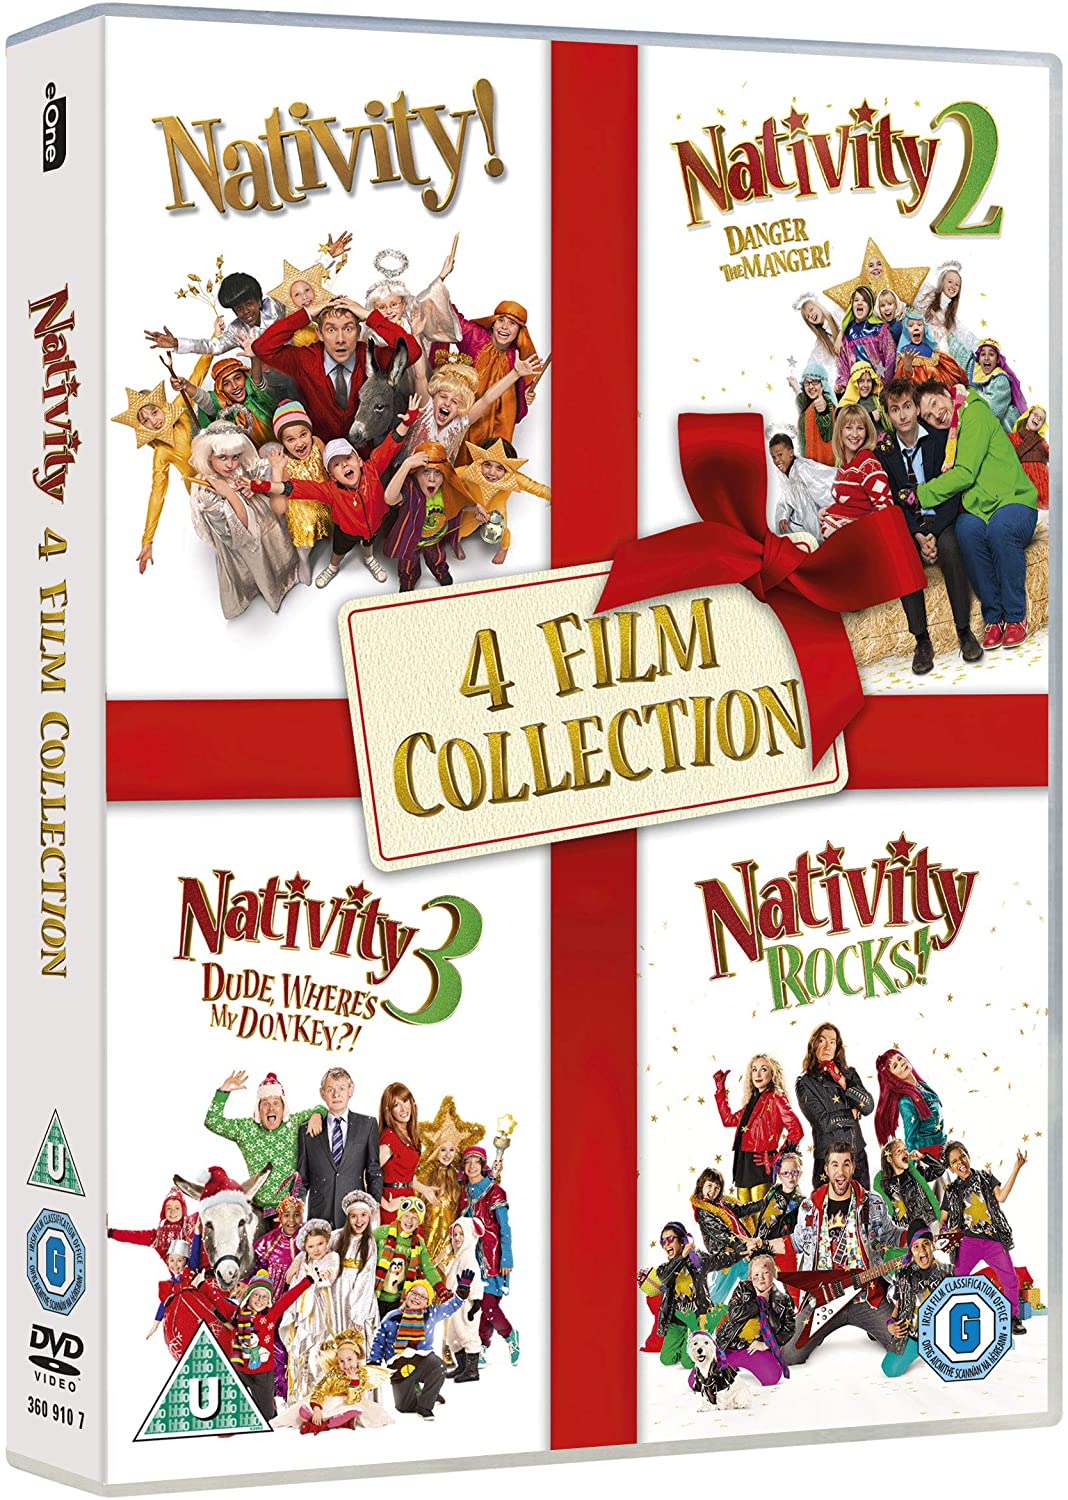 Nativity 4 Film Collection [2018] - Comedy [DVD]